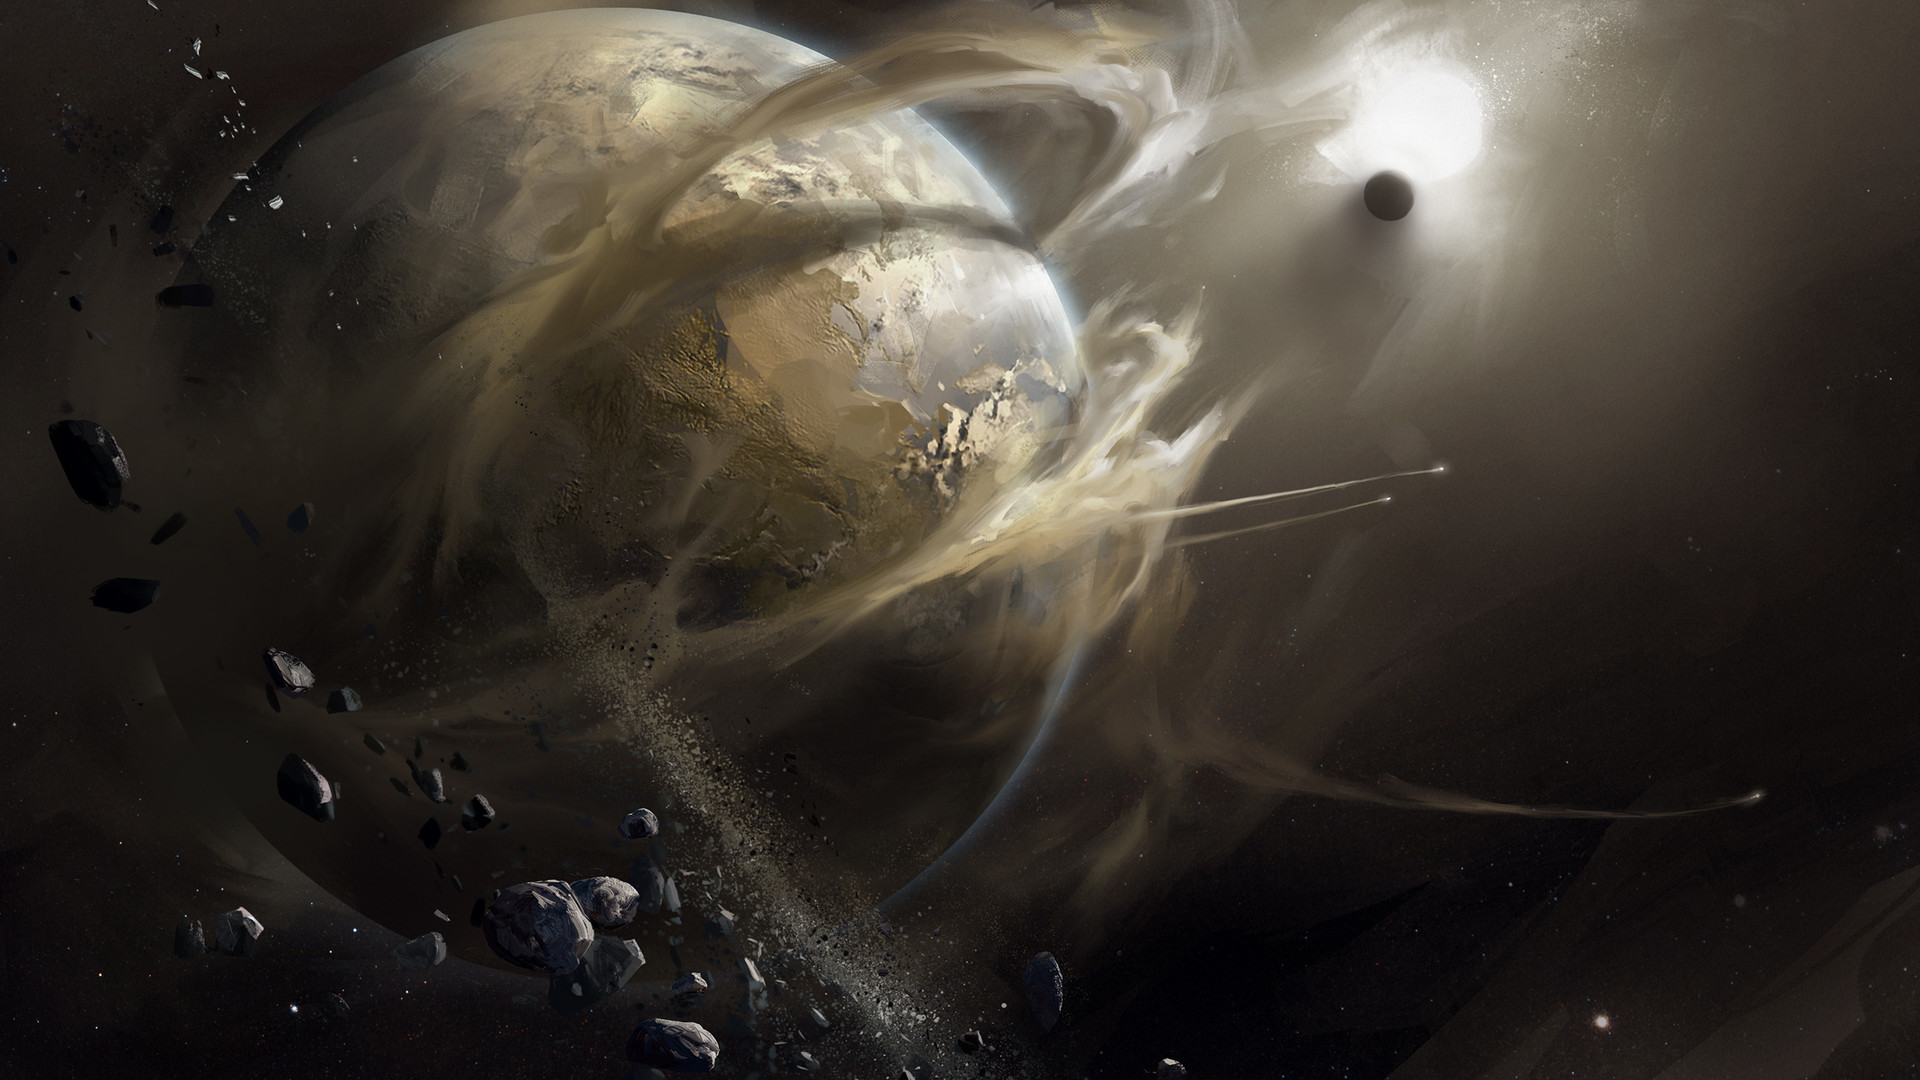 Image: Planets, space, dust, star, stones, art